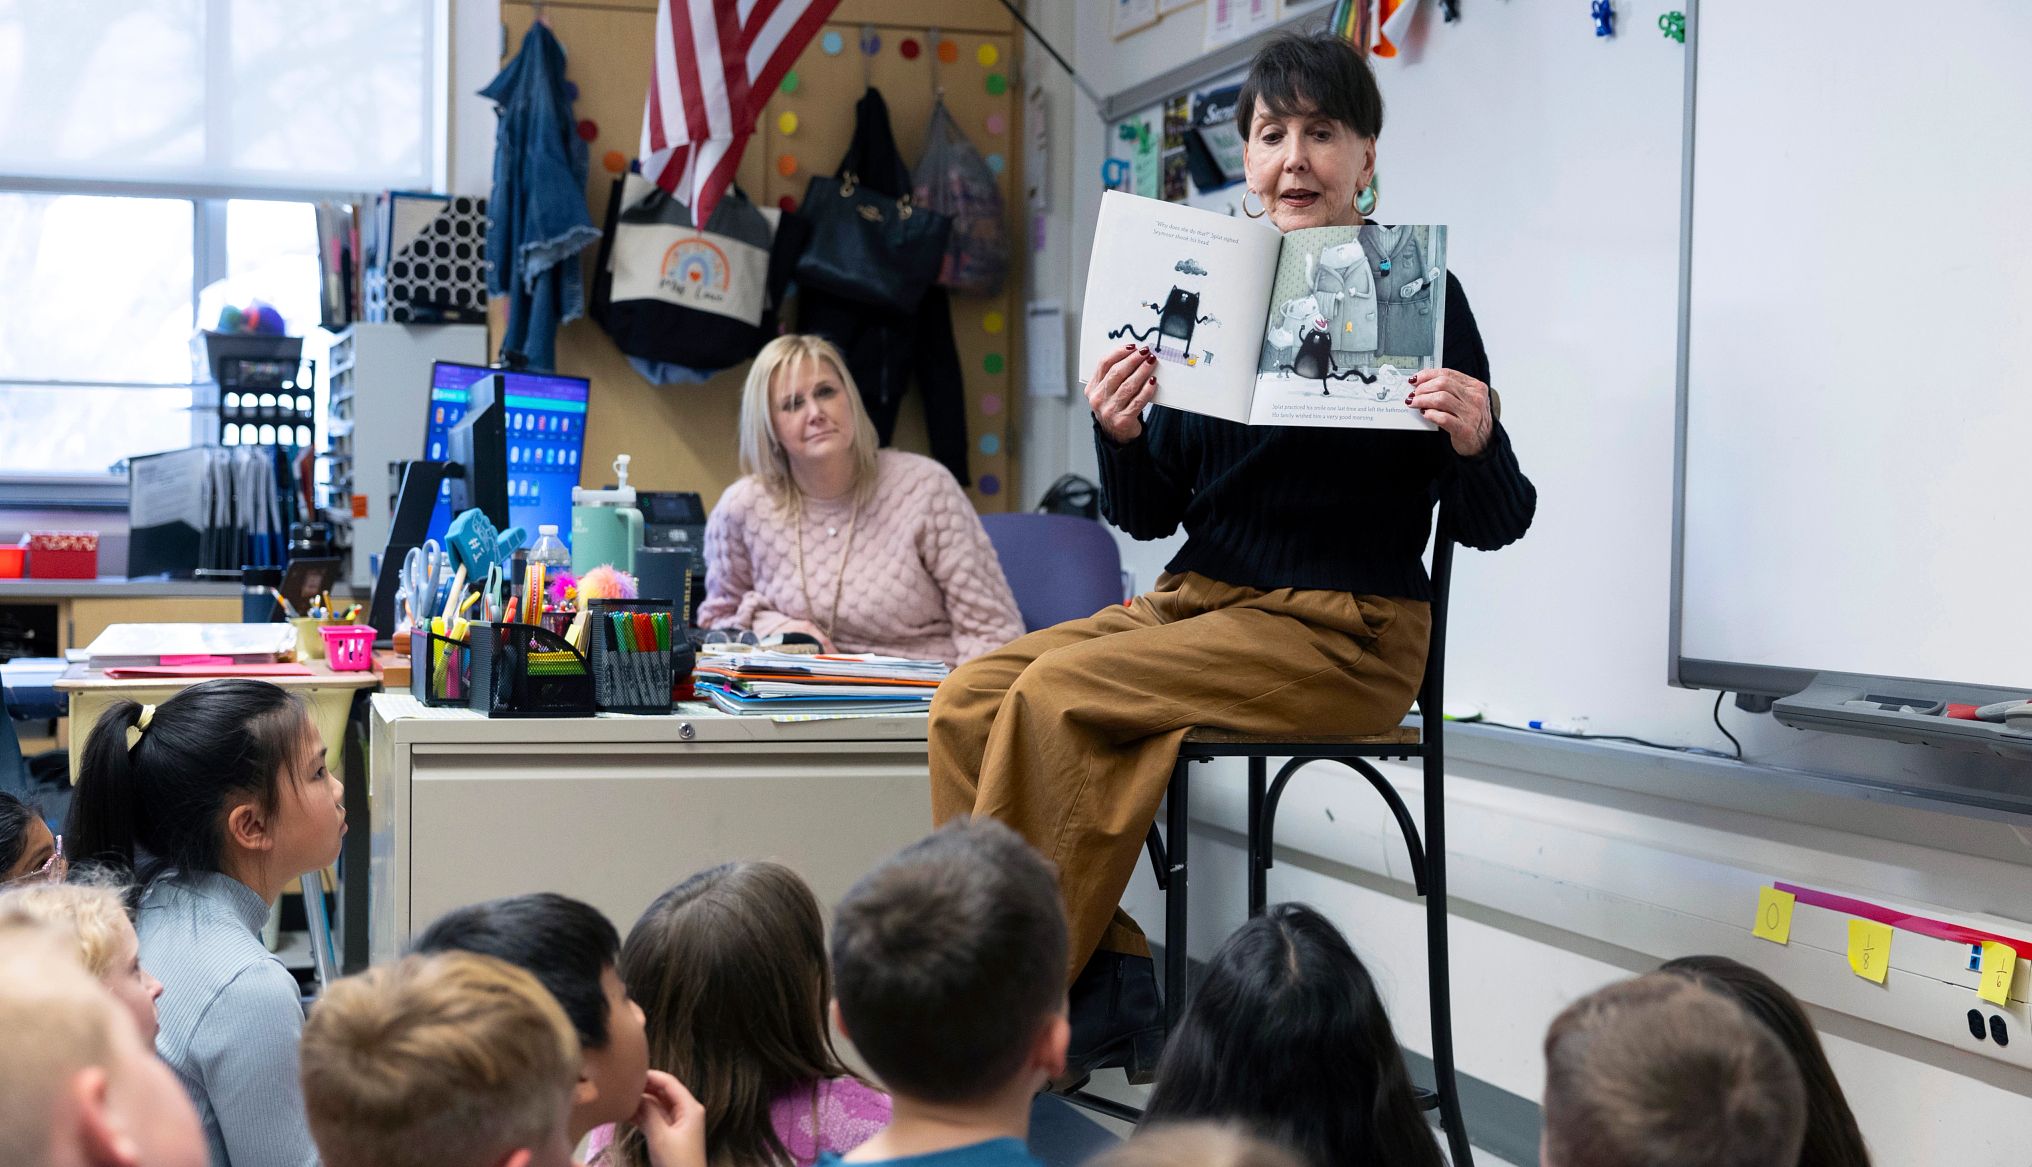 Janice Magri reads to students at Goodnoe Elementary in Bucks County, Pennsylvania